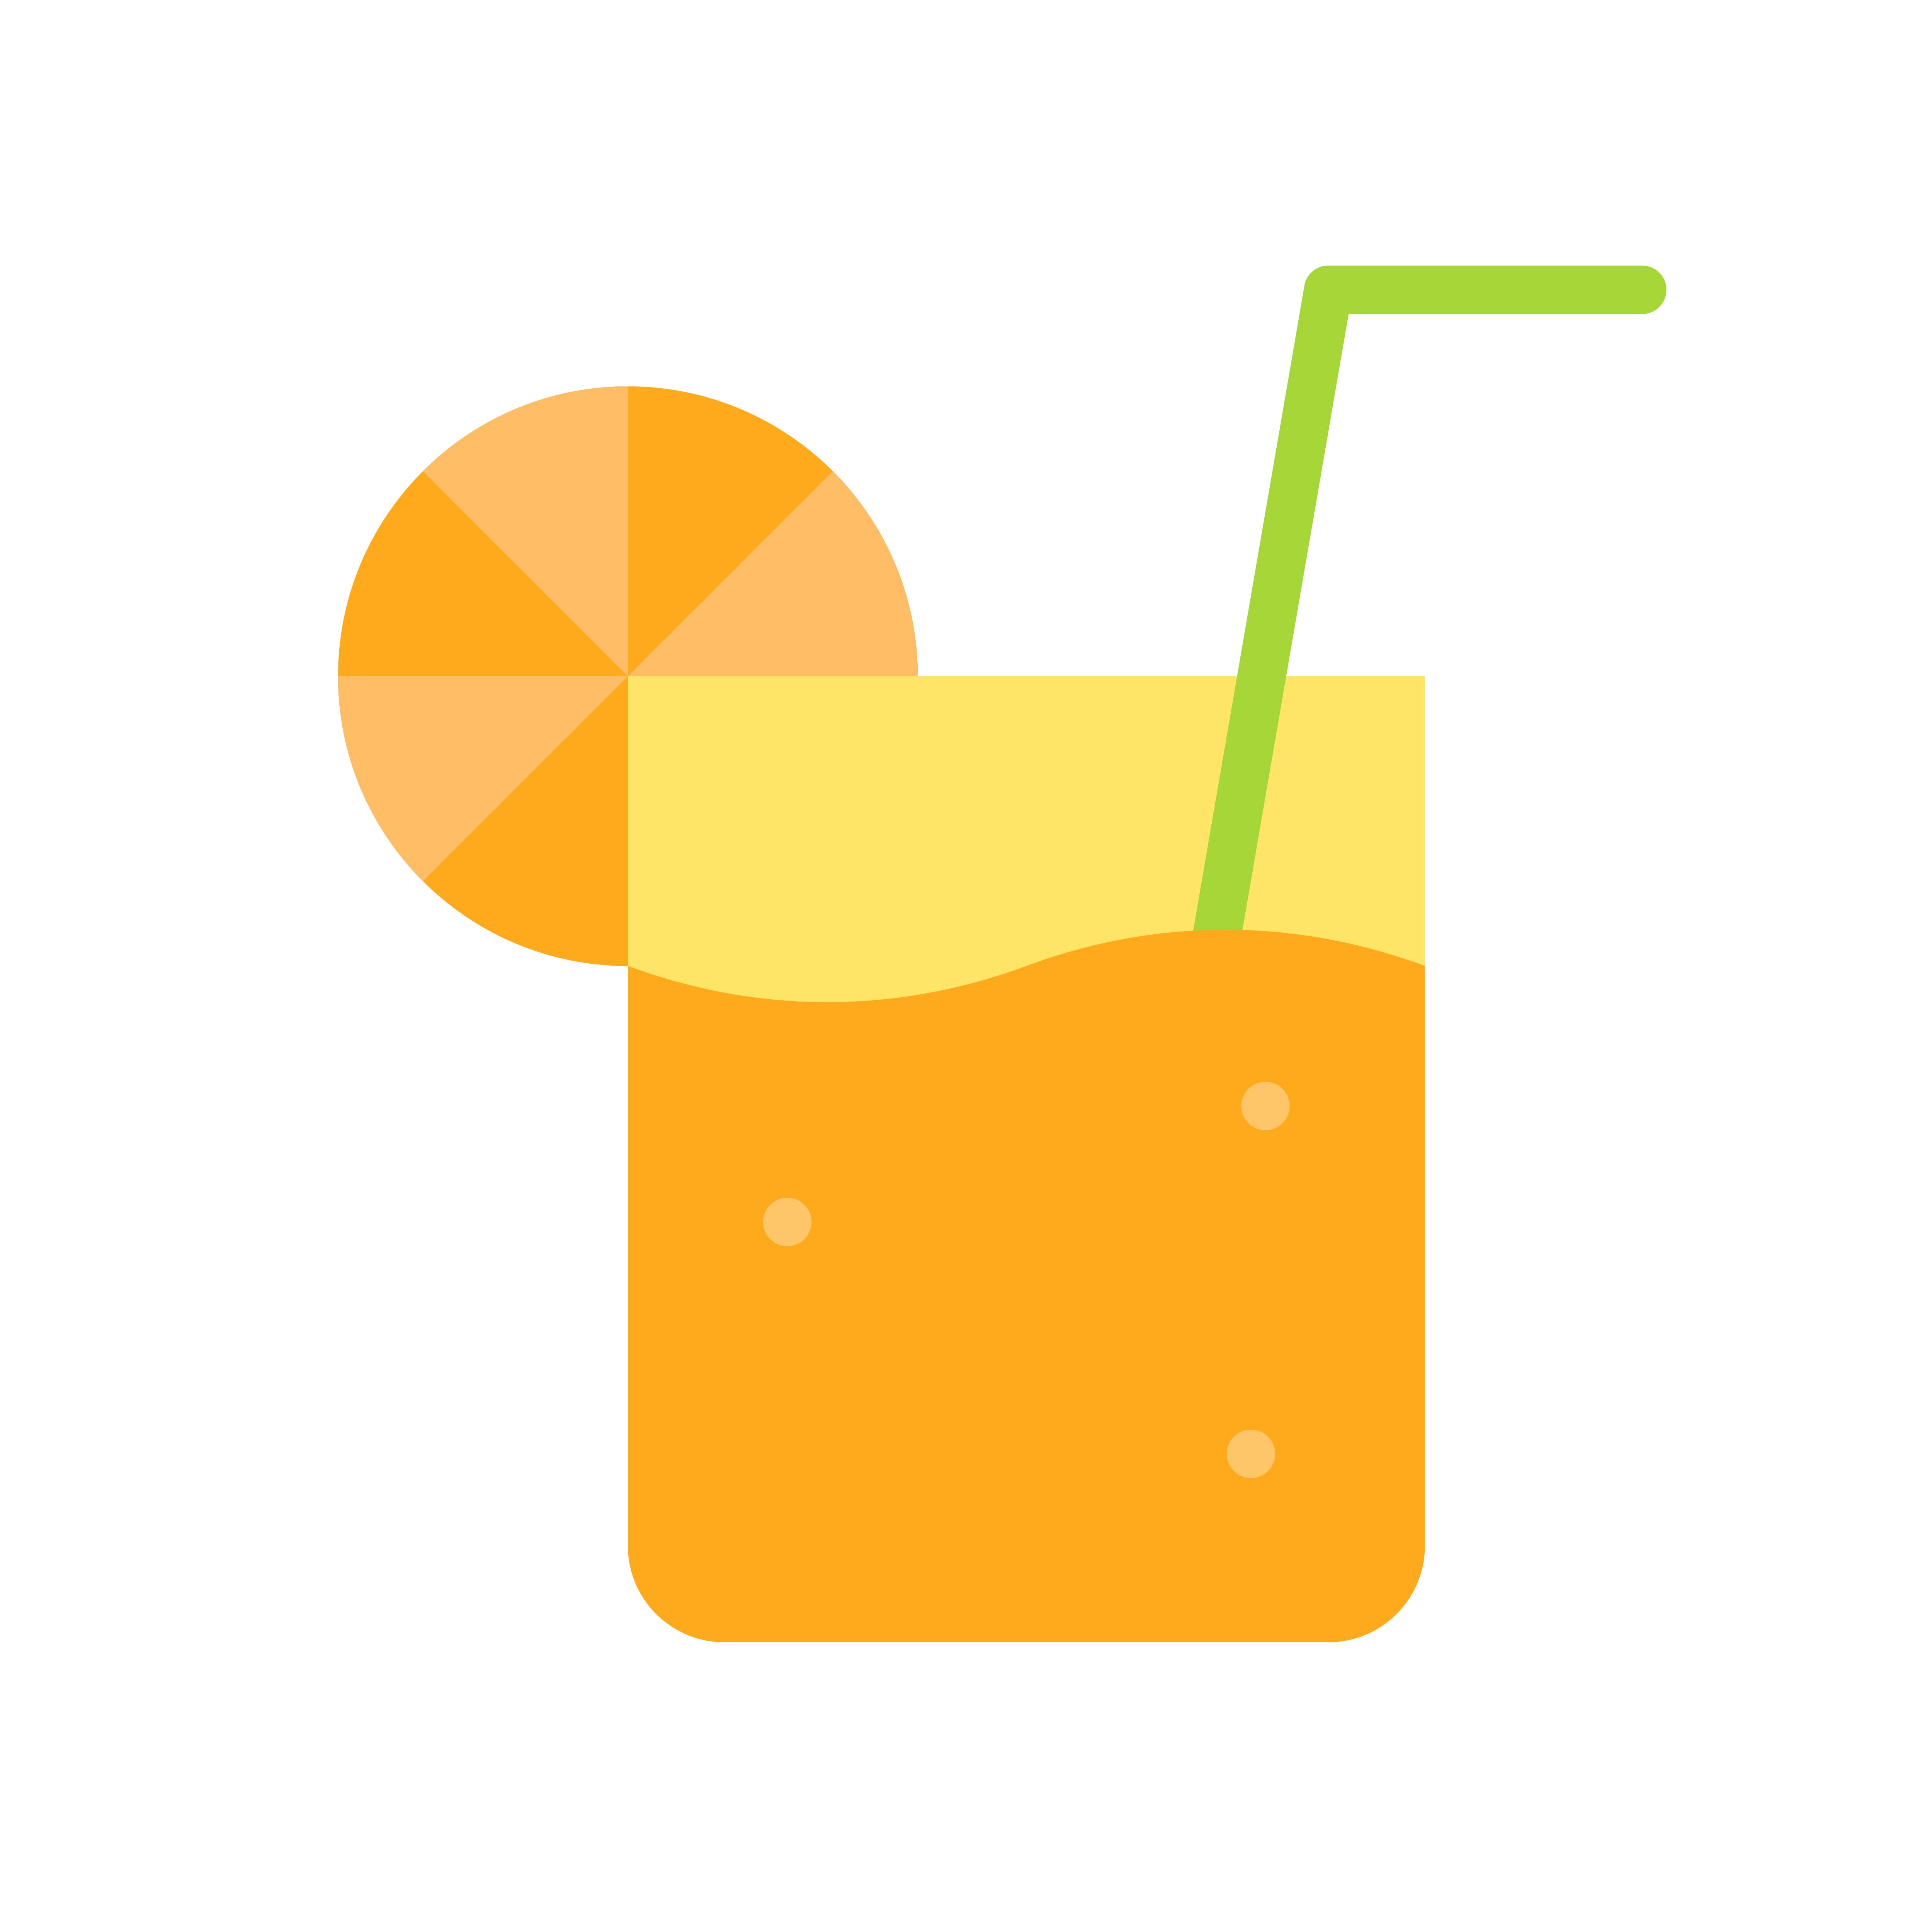  Orange  juice  vector tropical related flat style icon  